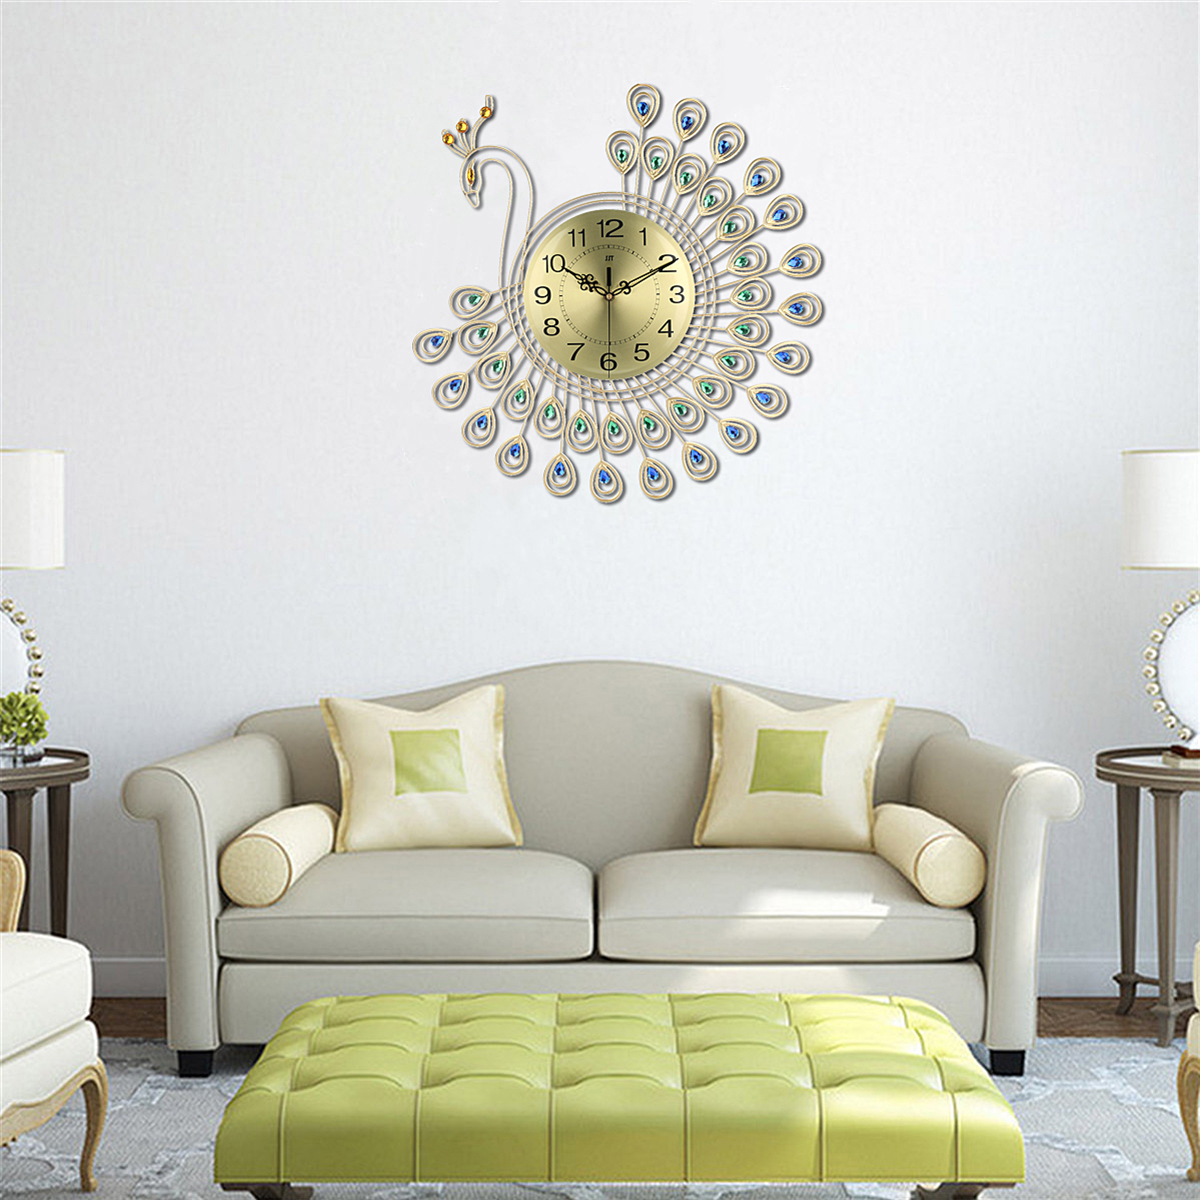 Find 53x53cm Large 3D Gold Diamond Peacock Wall Clock Metal Watch for Home Living Room Decoration DIY Clocks Crafts Ornaments Gift for Sale on Gipsybee.com with cryptocurrencies